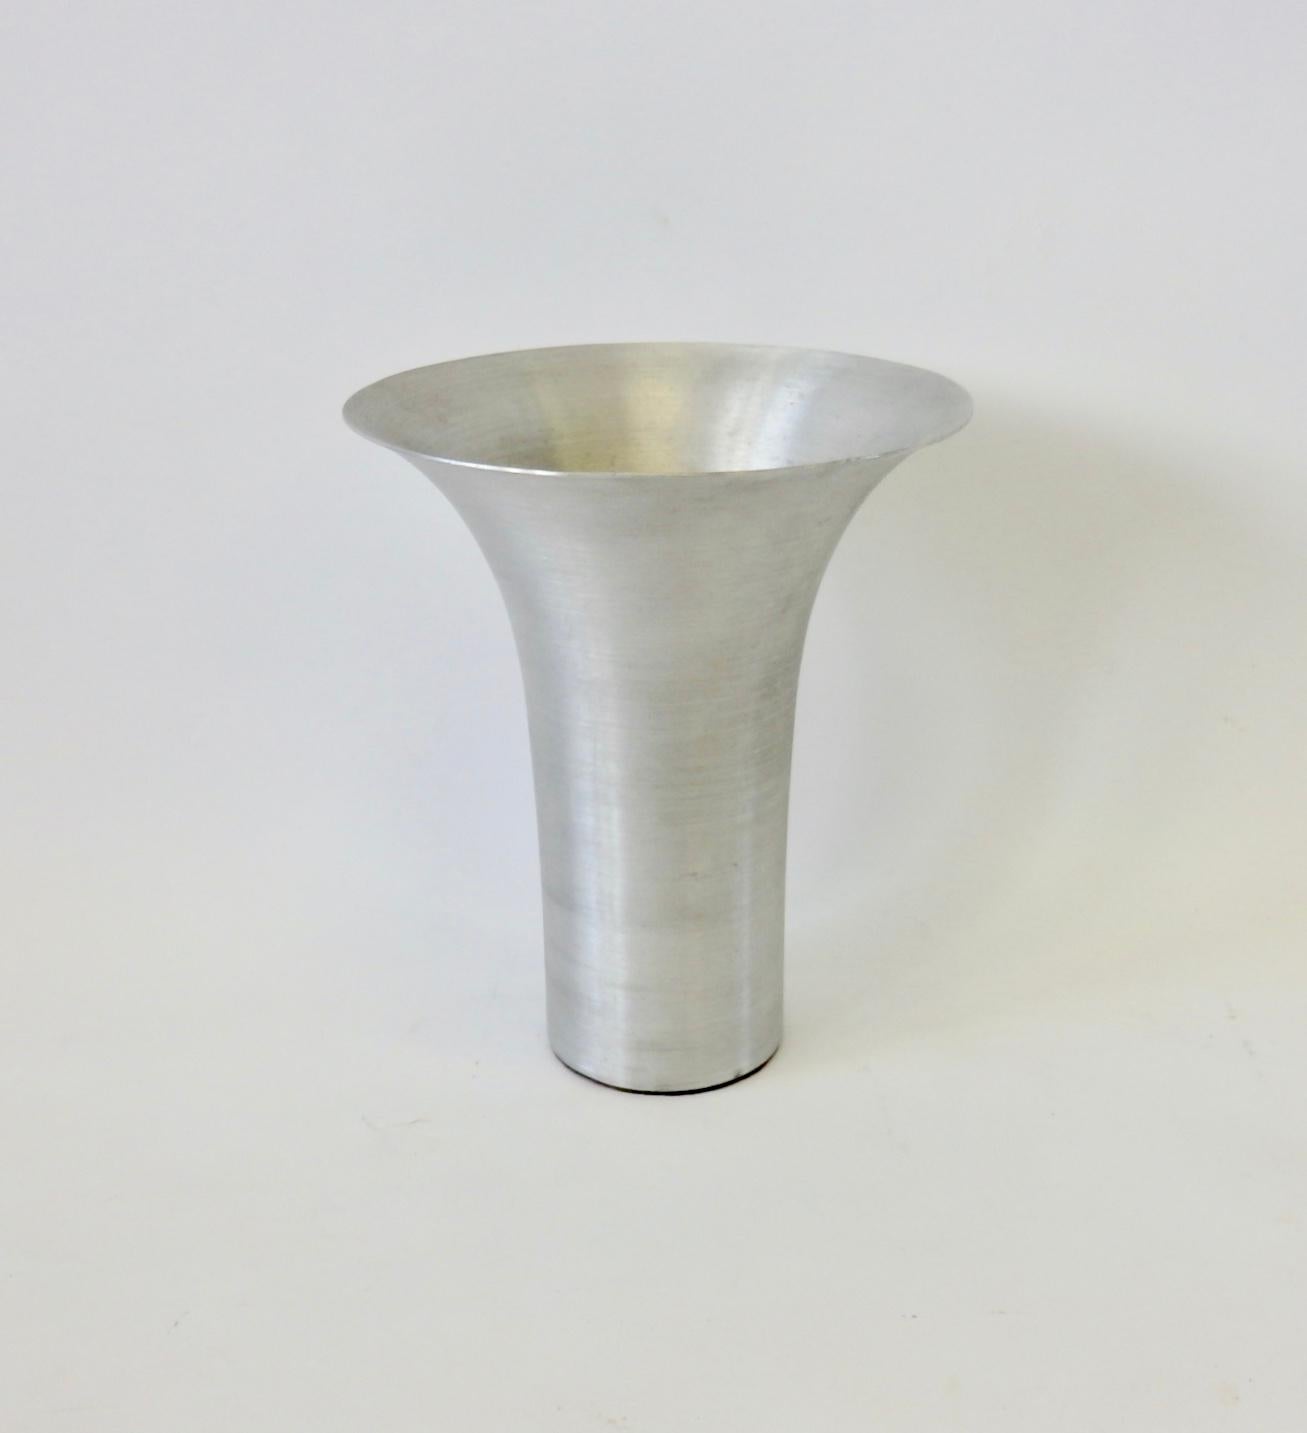 Spun aluminum flare top vase designed by Russel Wright. Stamped Russel Wright on underside.